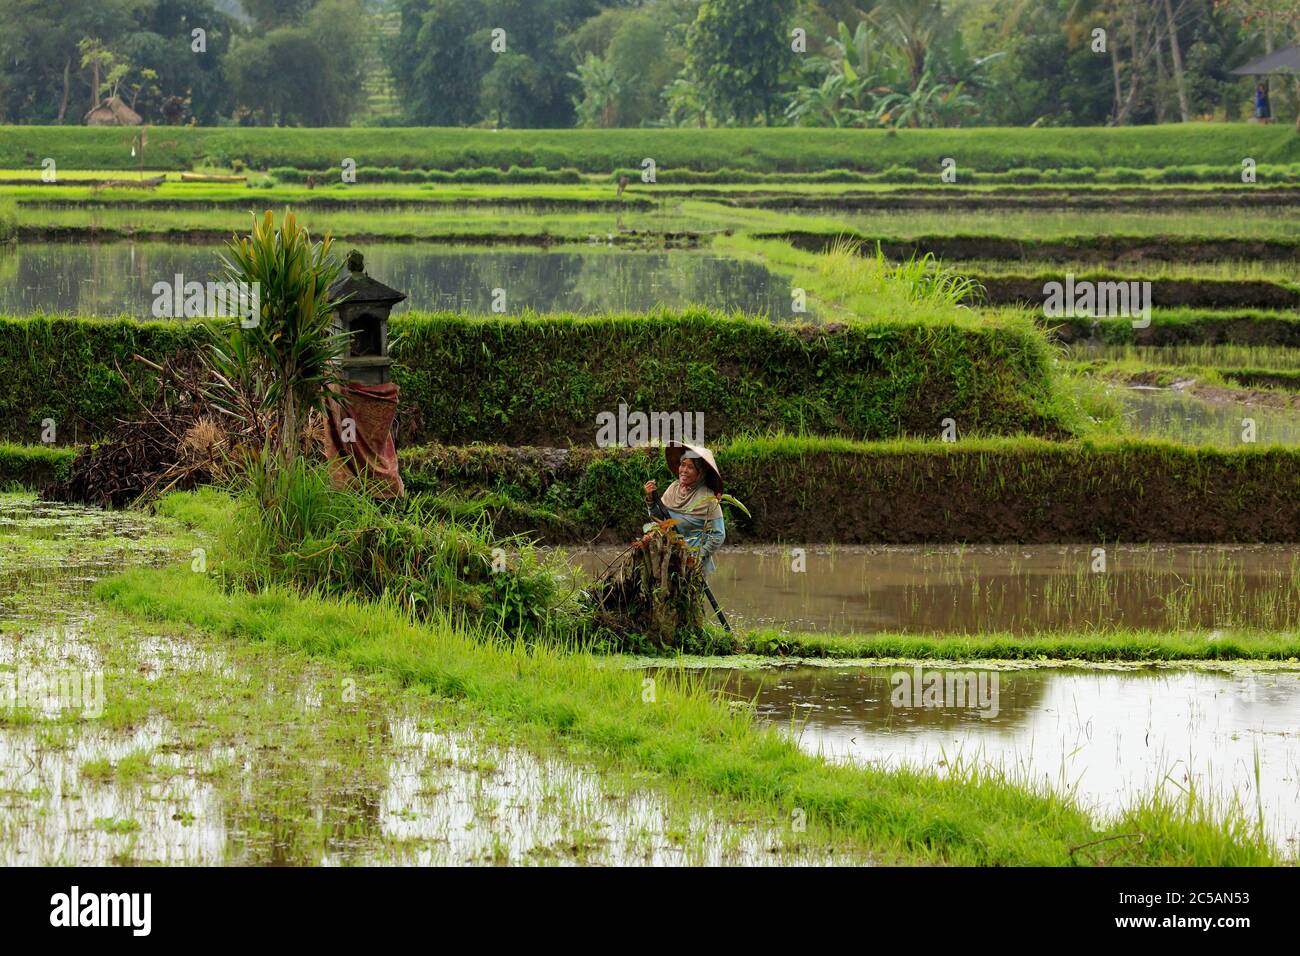 Bali. Indonesia, 14 July 2010: Overview of a typical asian woman working on rice cultivation in a field flooded with water in the plains surrounding B Stock Photo